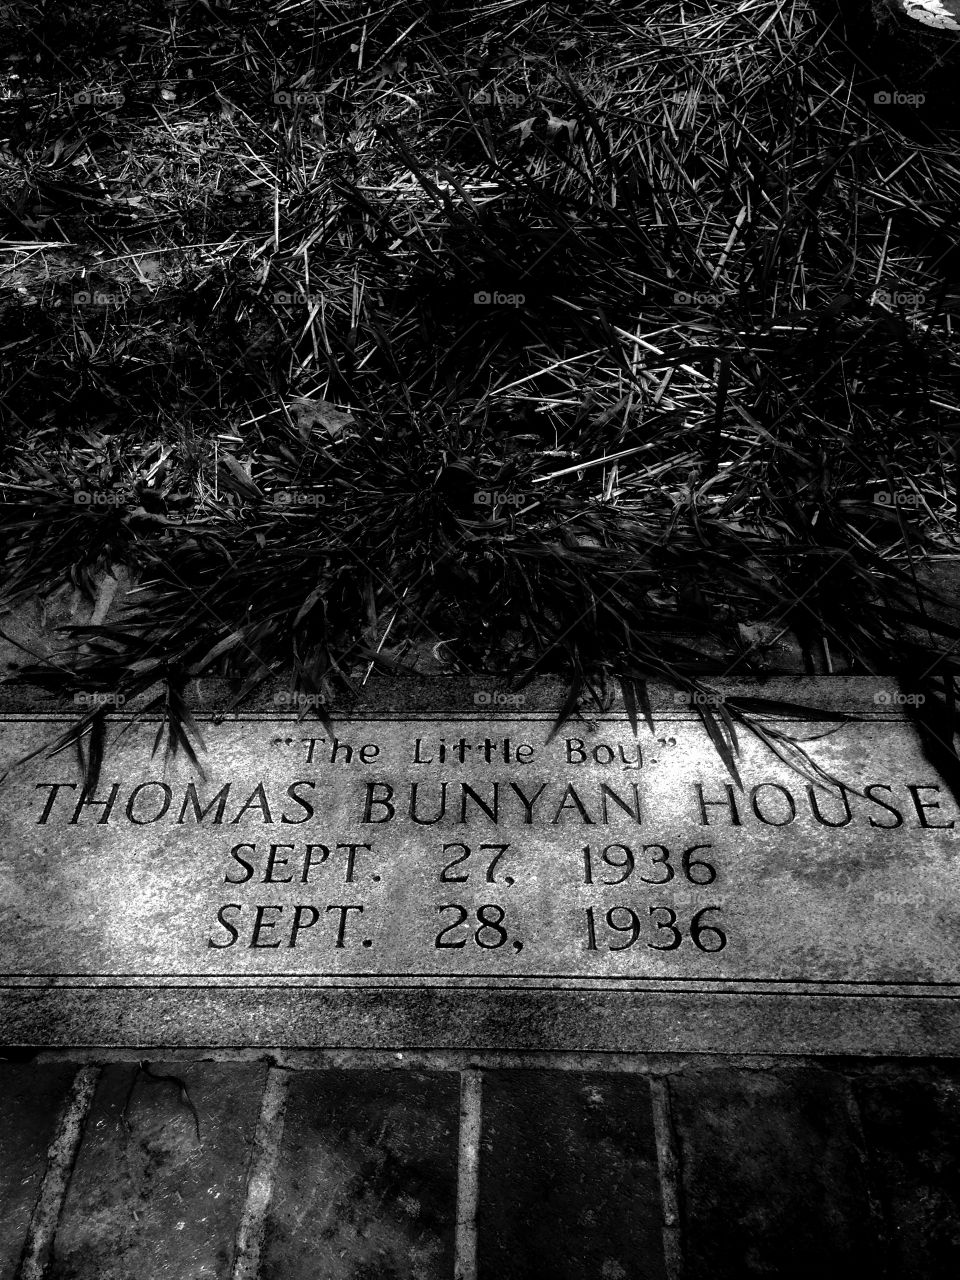 Headstone, cemetery, black and white 